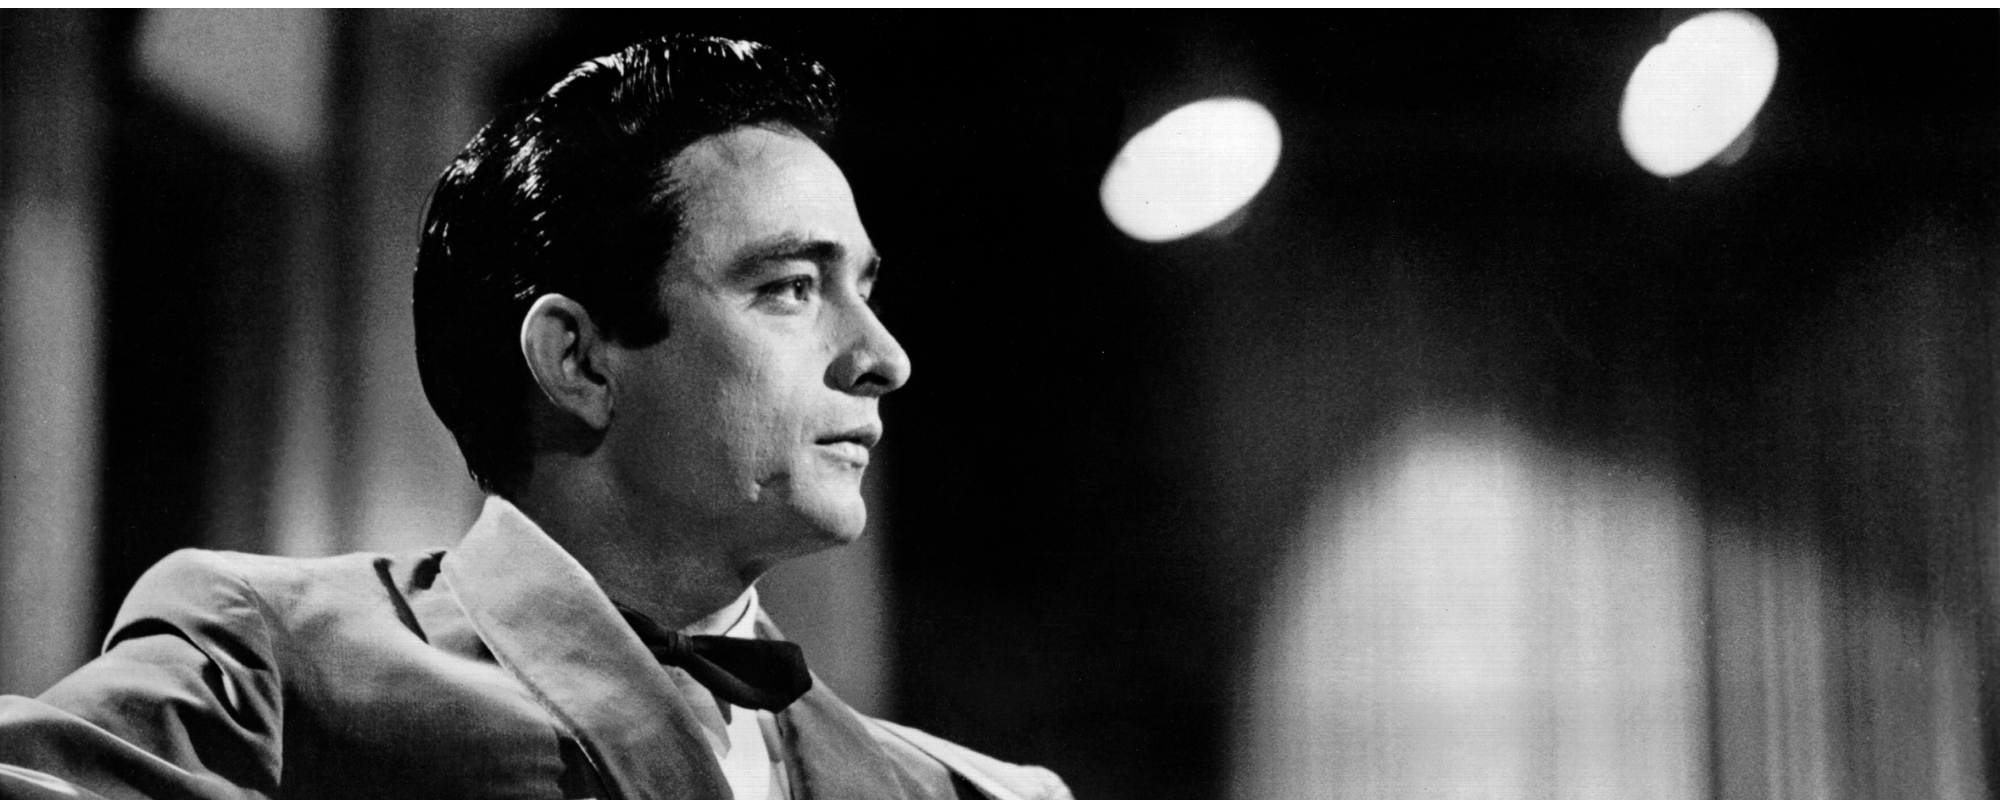 The Story Behind Johnny Cash’s Debut 1955 Singles “Hey Porter” and “Cry! Cry! Cry!”